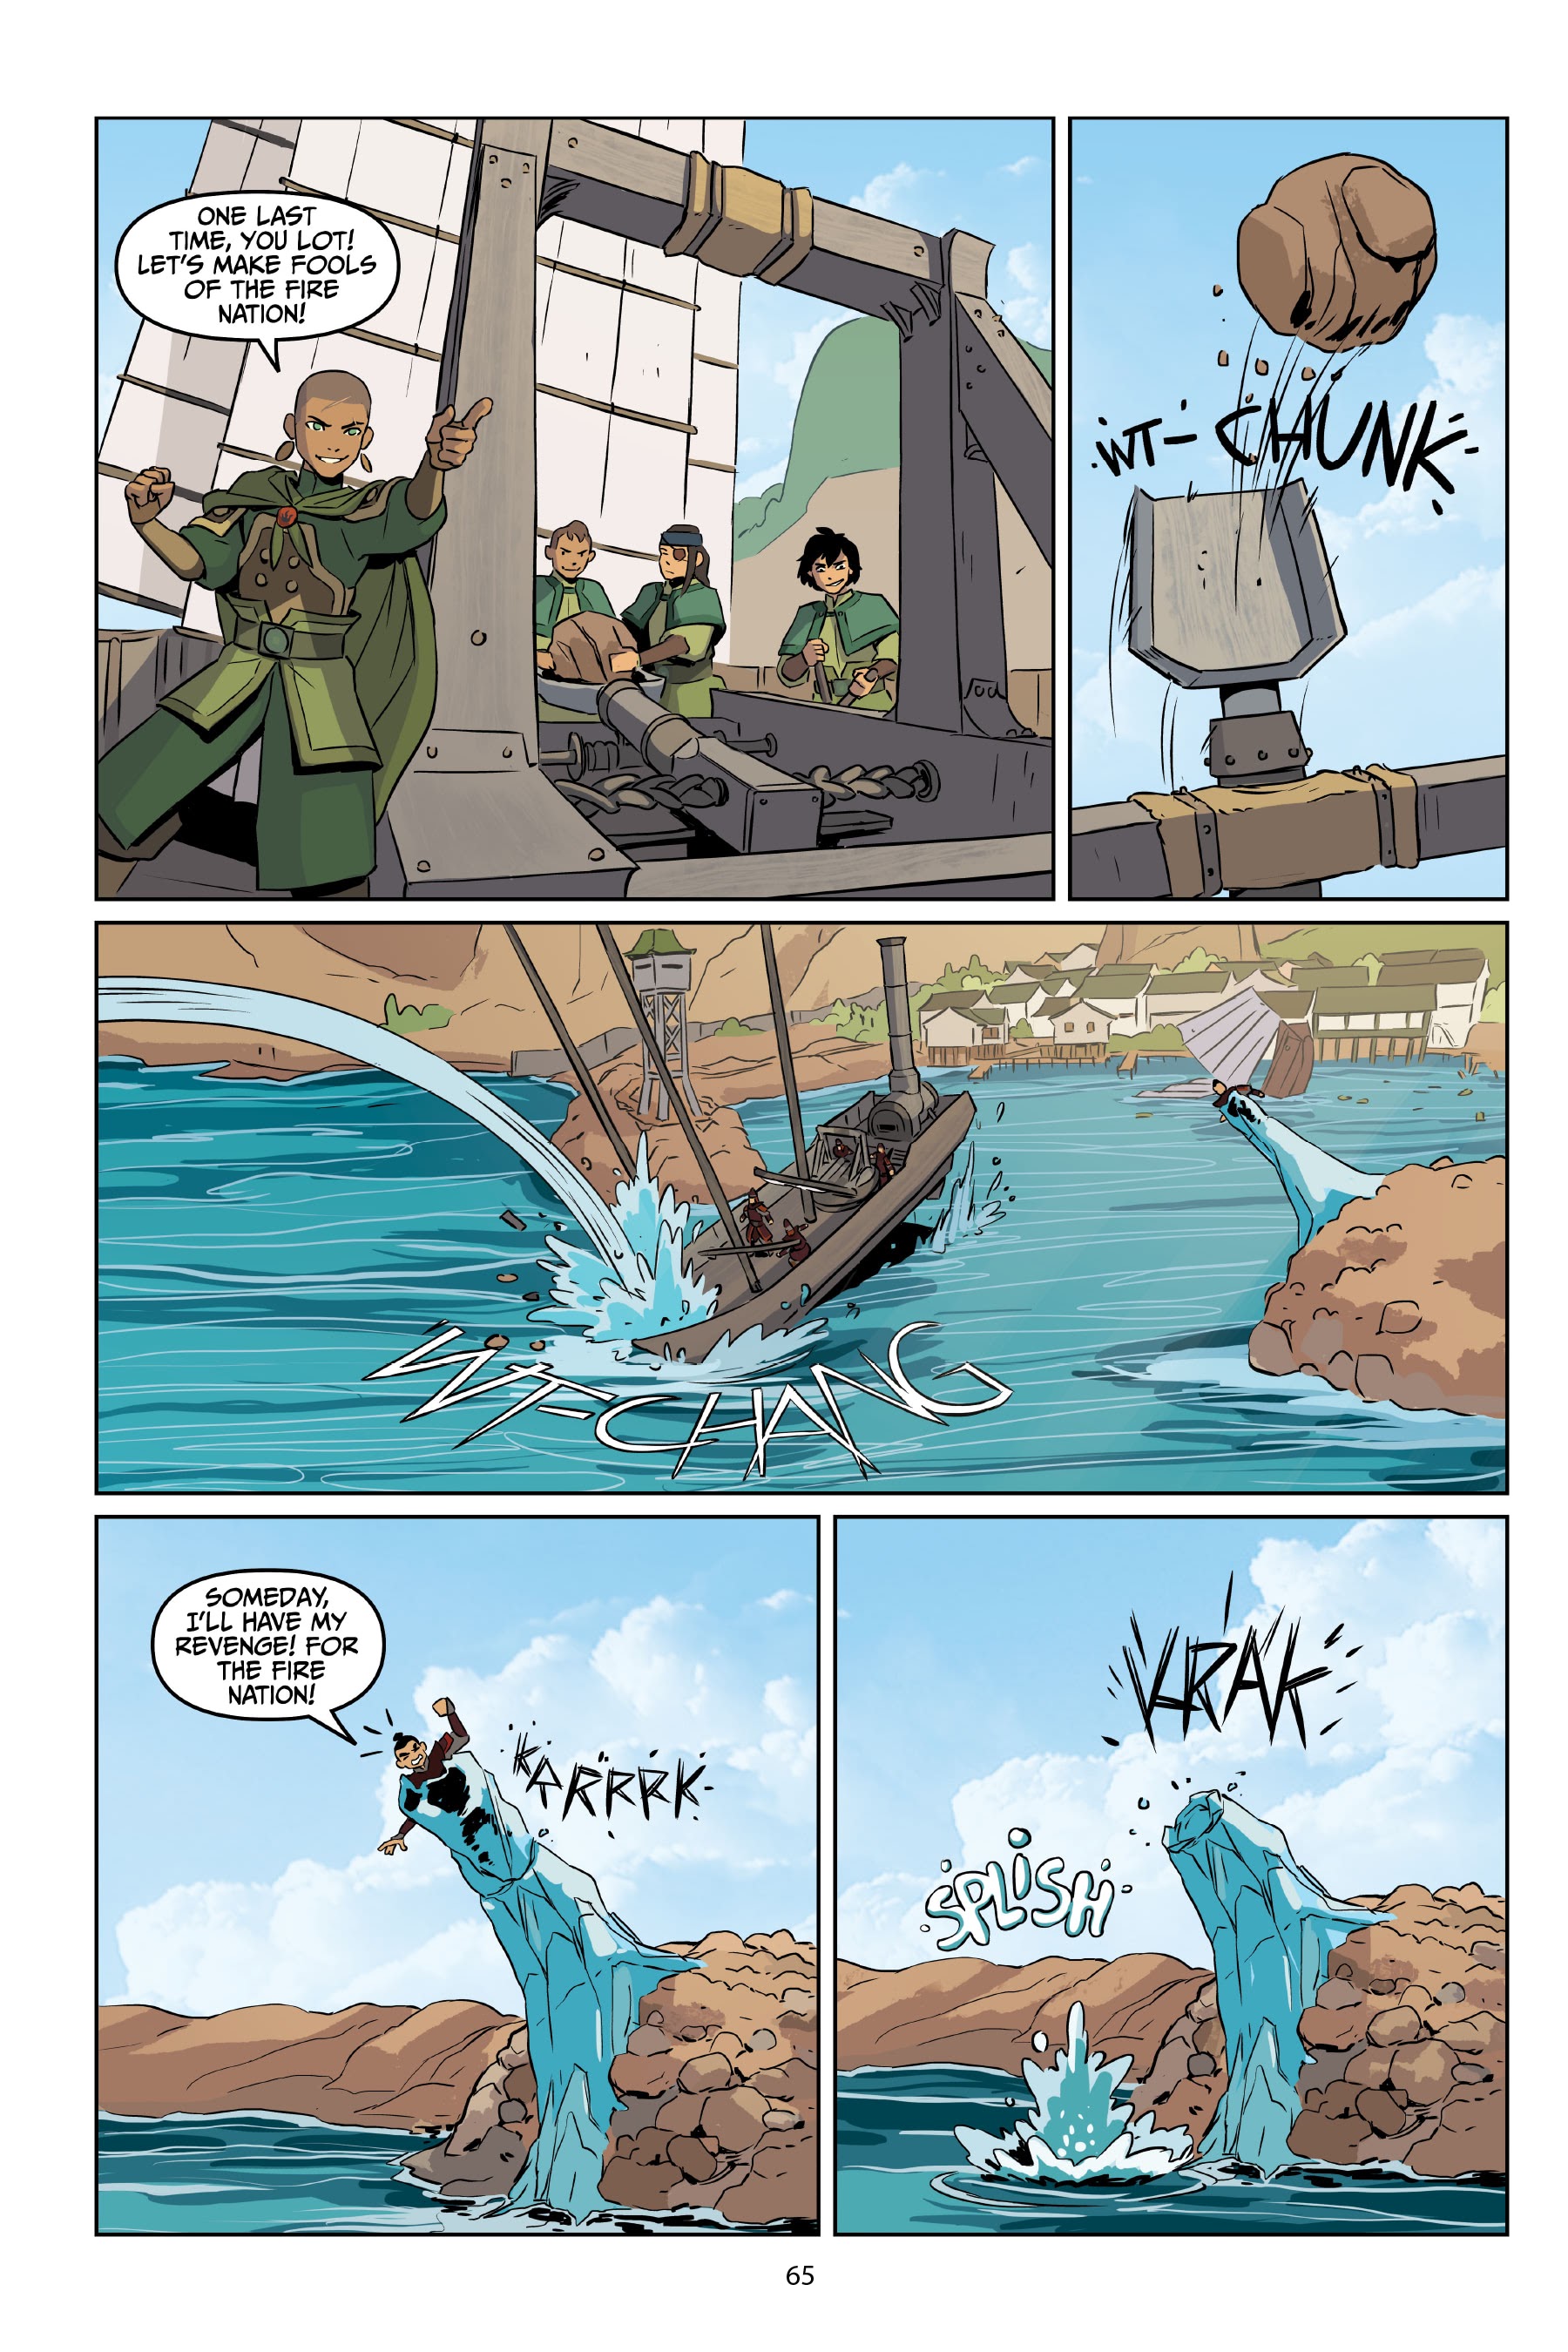 Read online Avatar: The Last Airbender—Katara and the Pirate's Silver comic -  Issue # TPB - 65